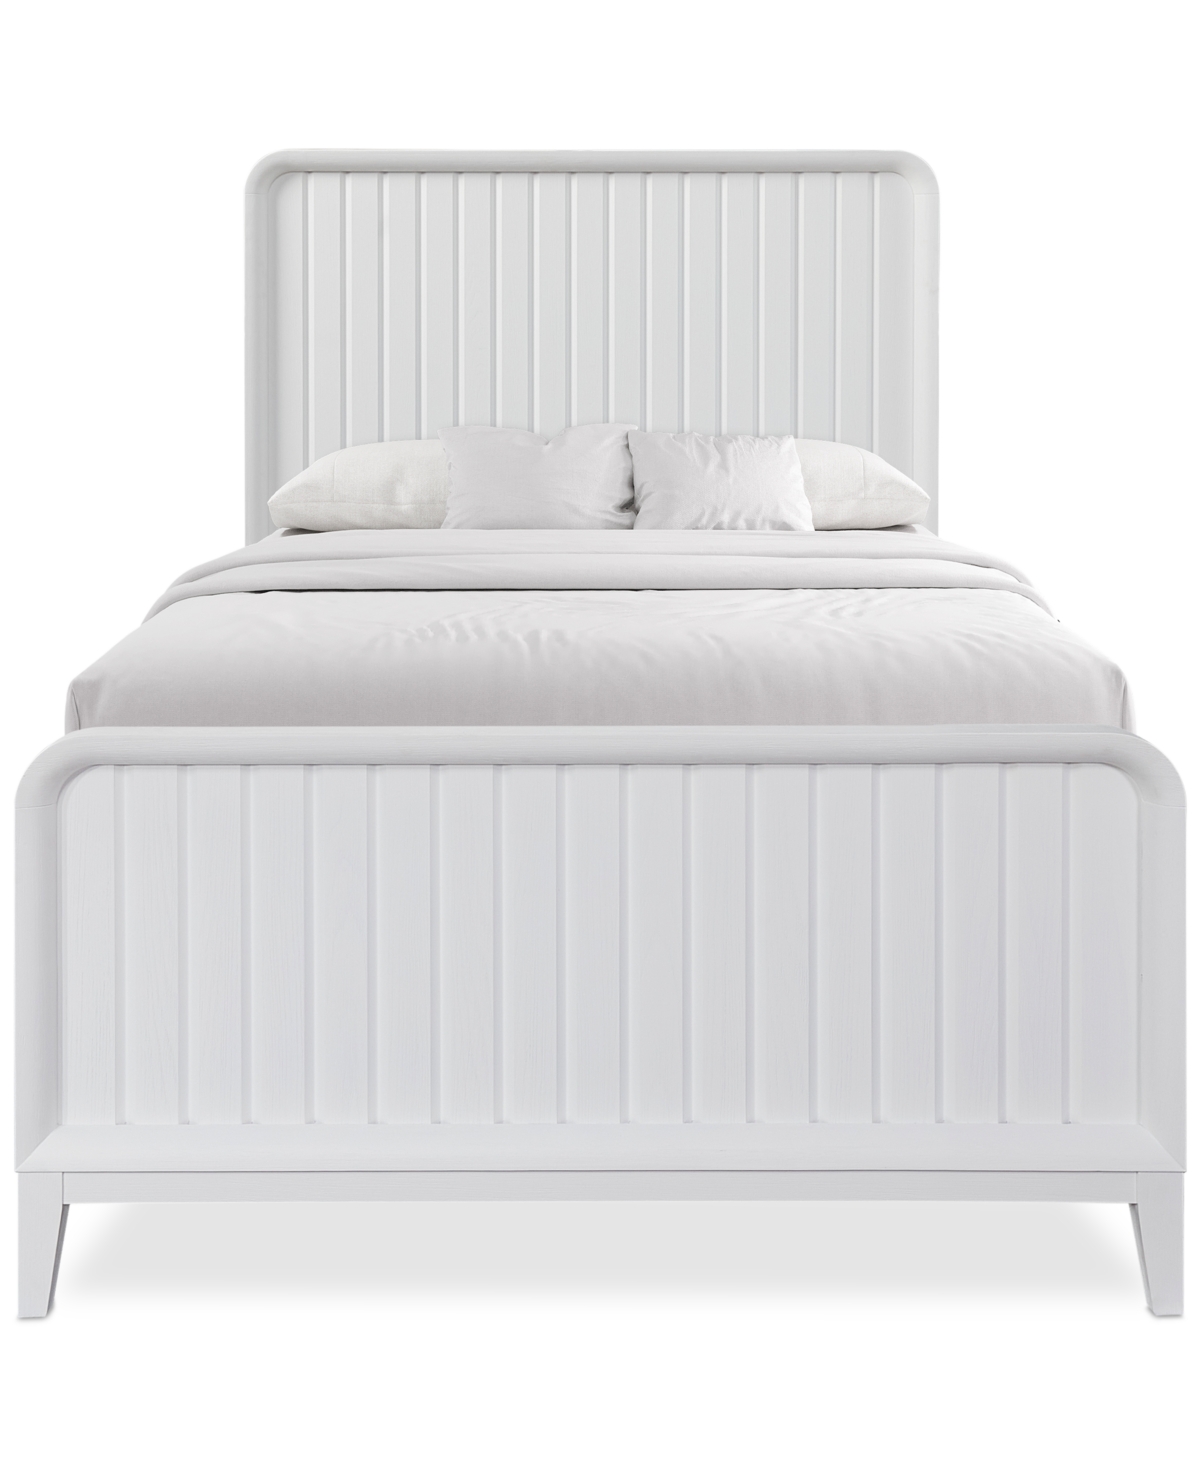 Shop Macy's Assemblage Full Bed In White